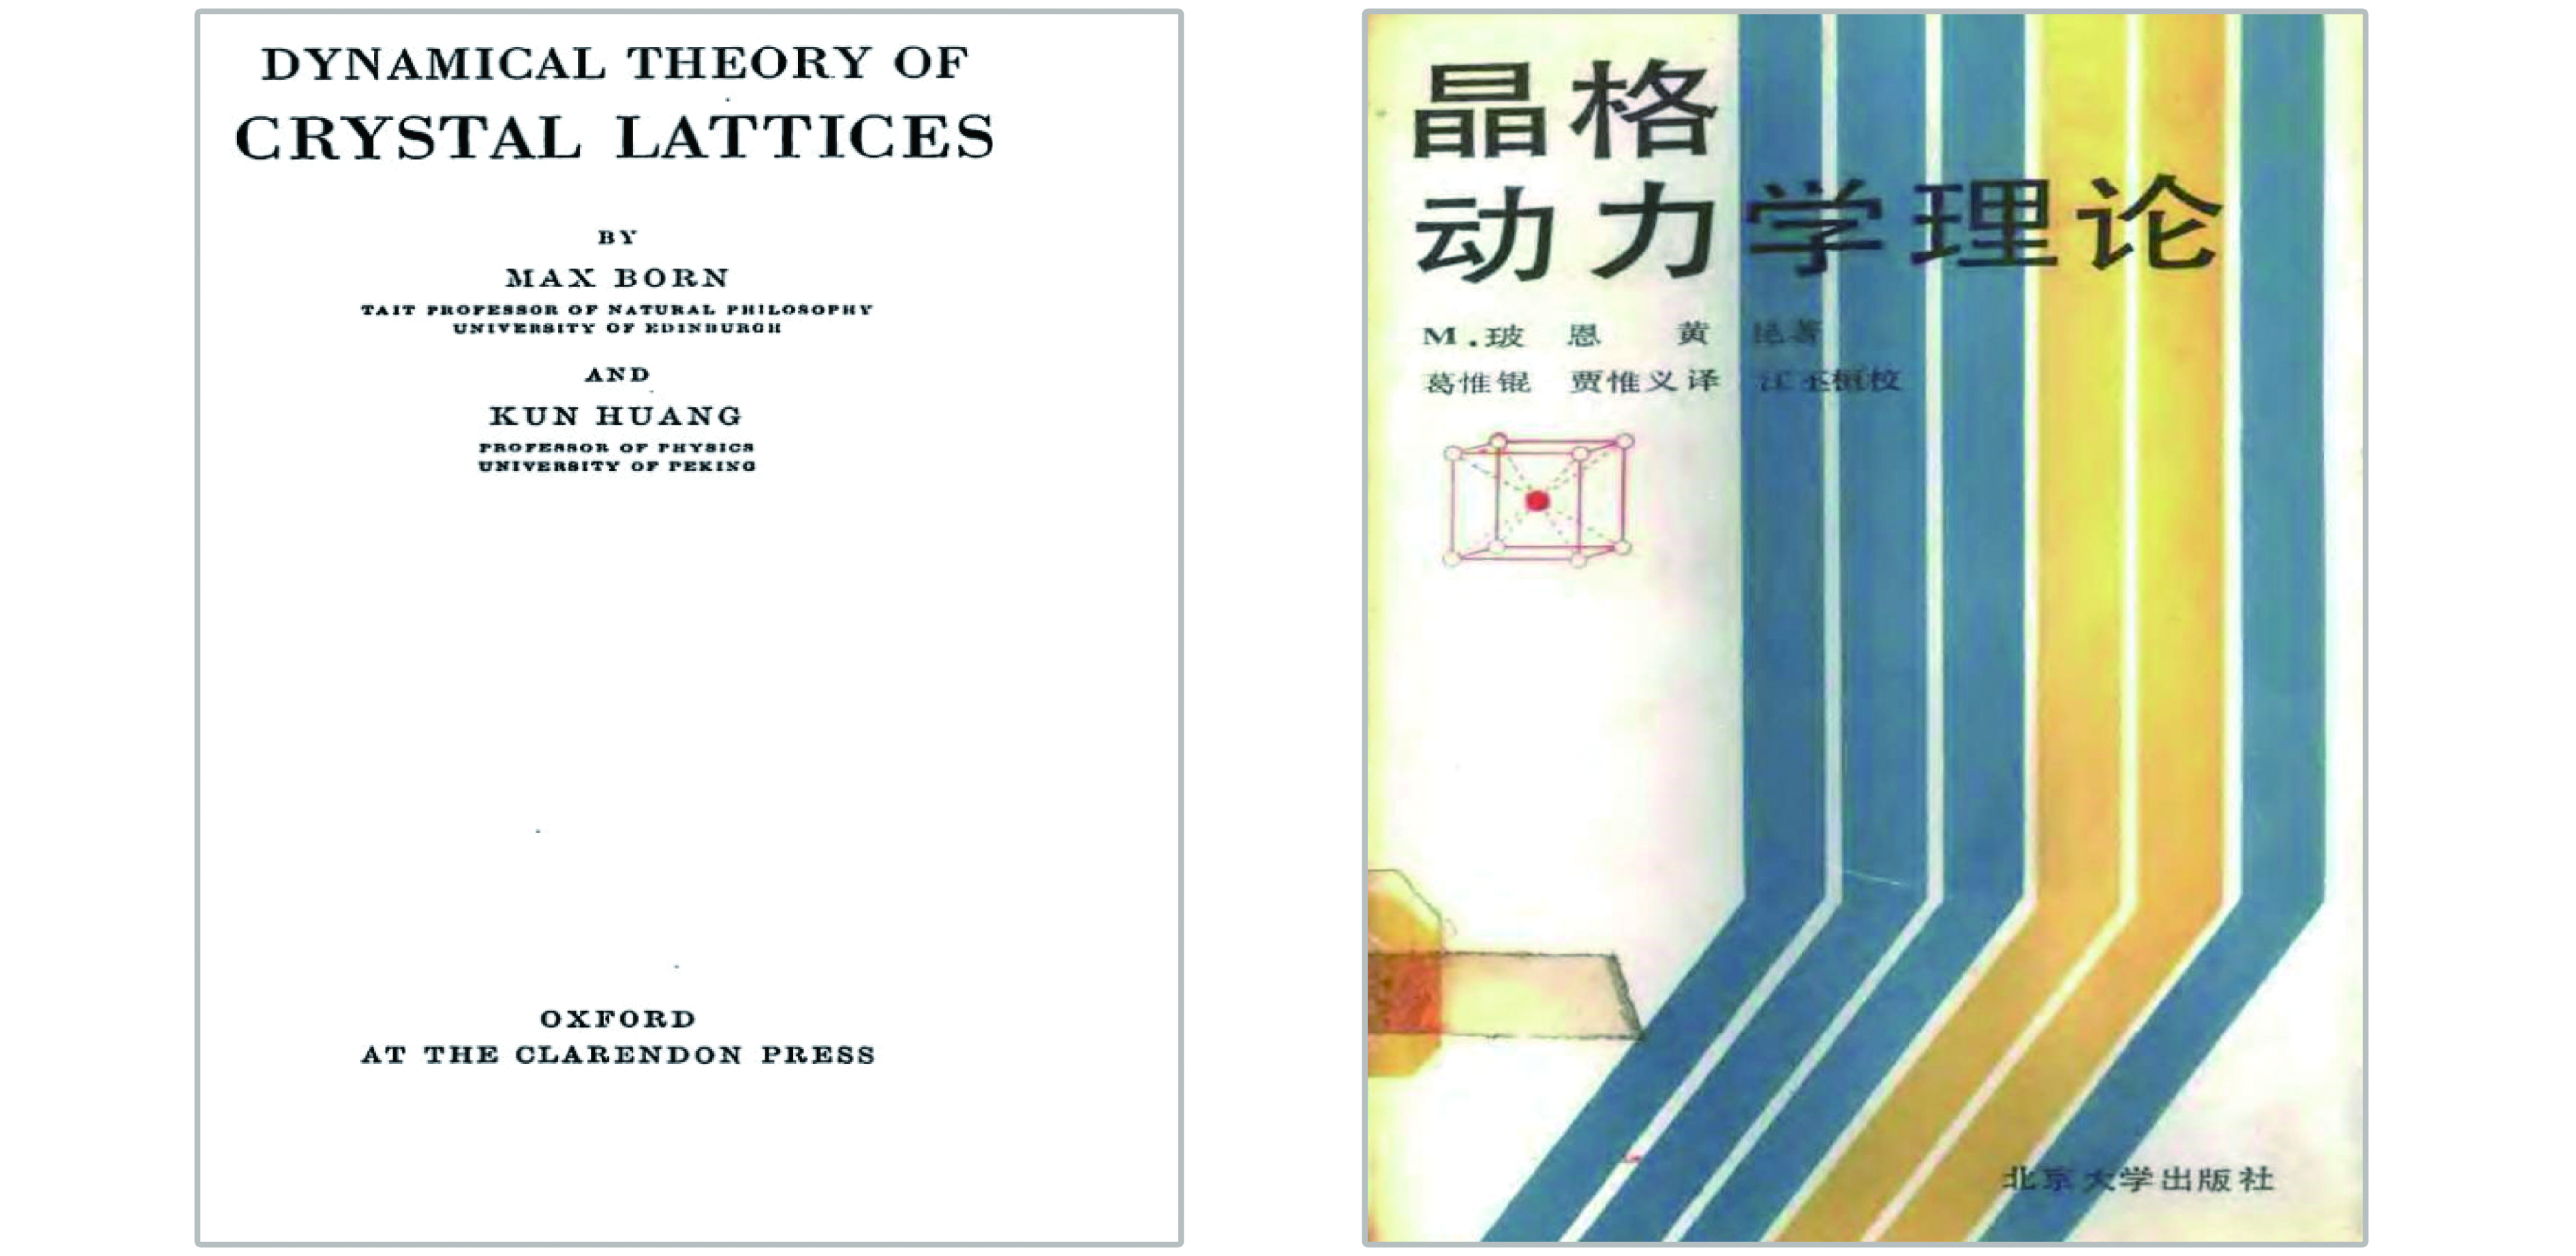 (Color online) Covers of the book "Dynamical theory of crystal lattices" co-authored by Prof. Kun Huang and Prof. Max Born, and the Chinese version.